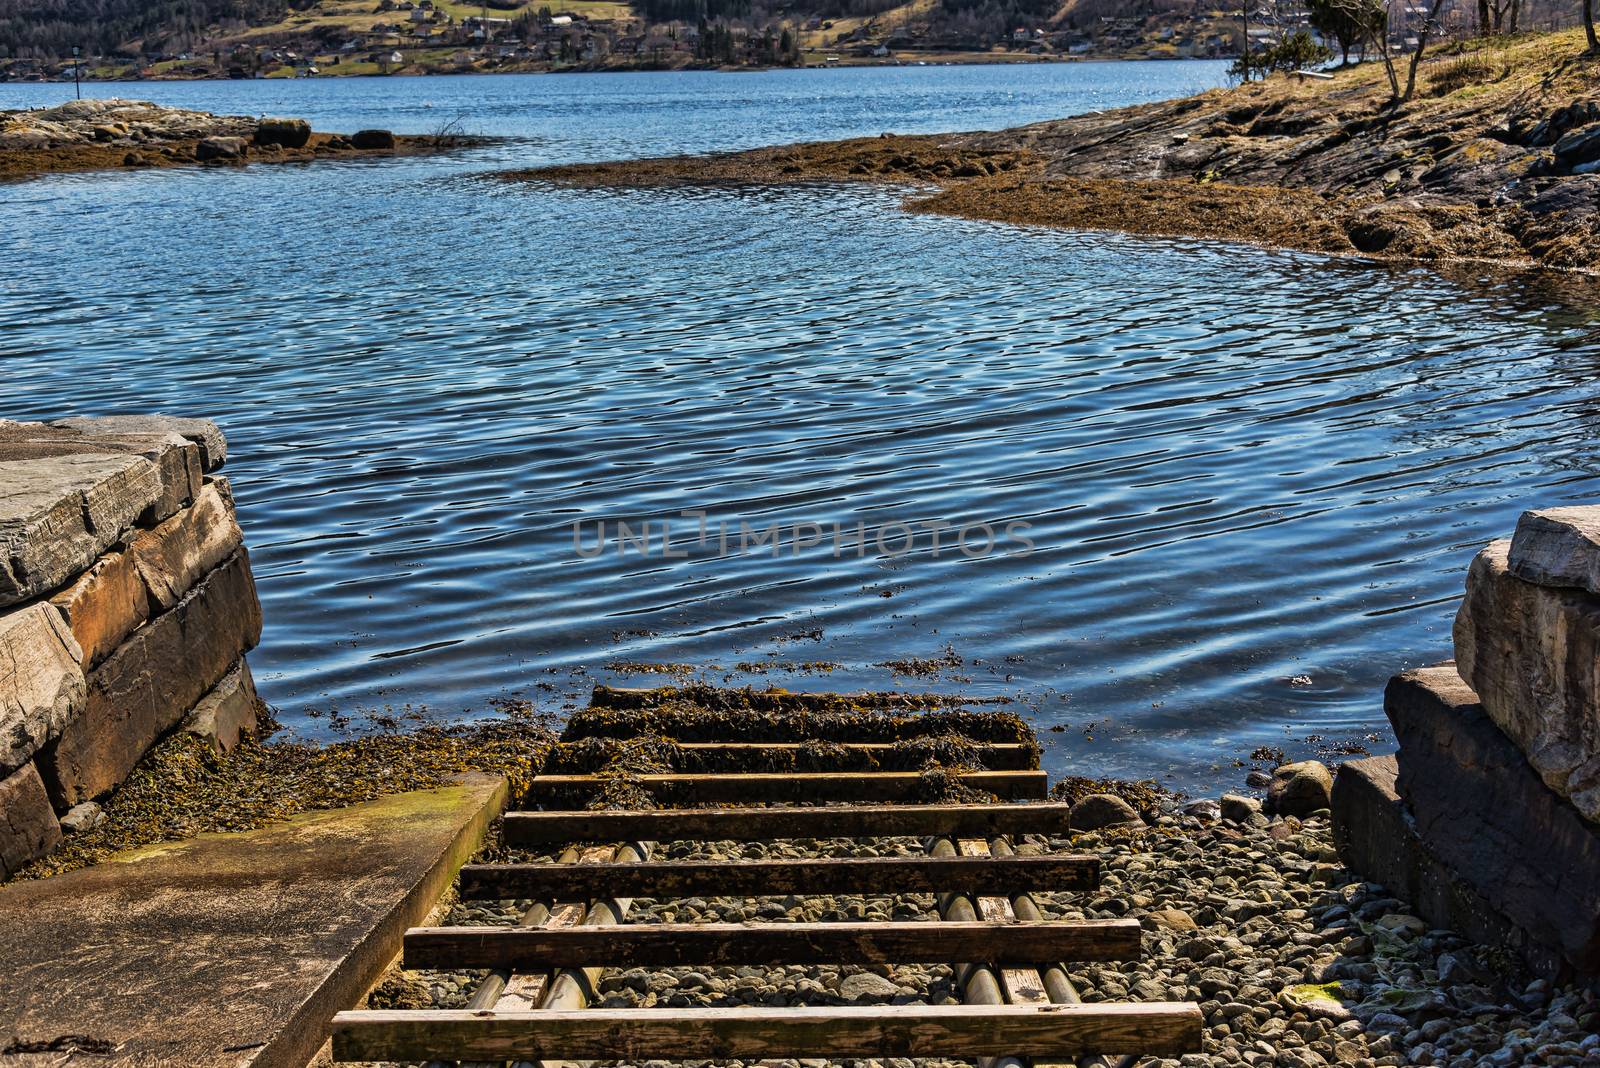 A boat landing with wooden sleepers by a Norwegian fjord